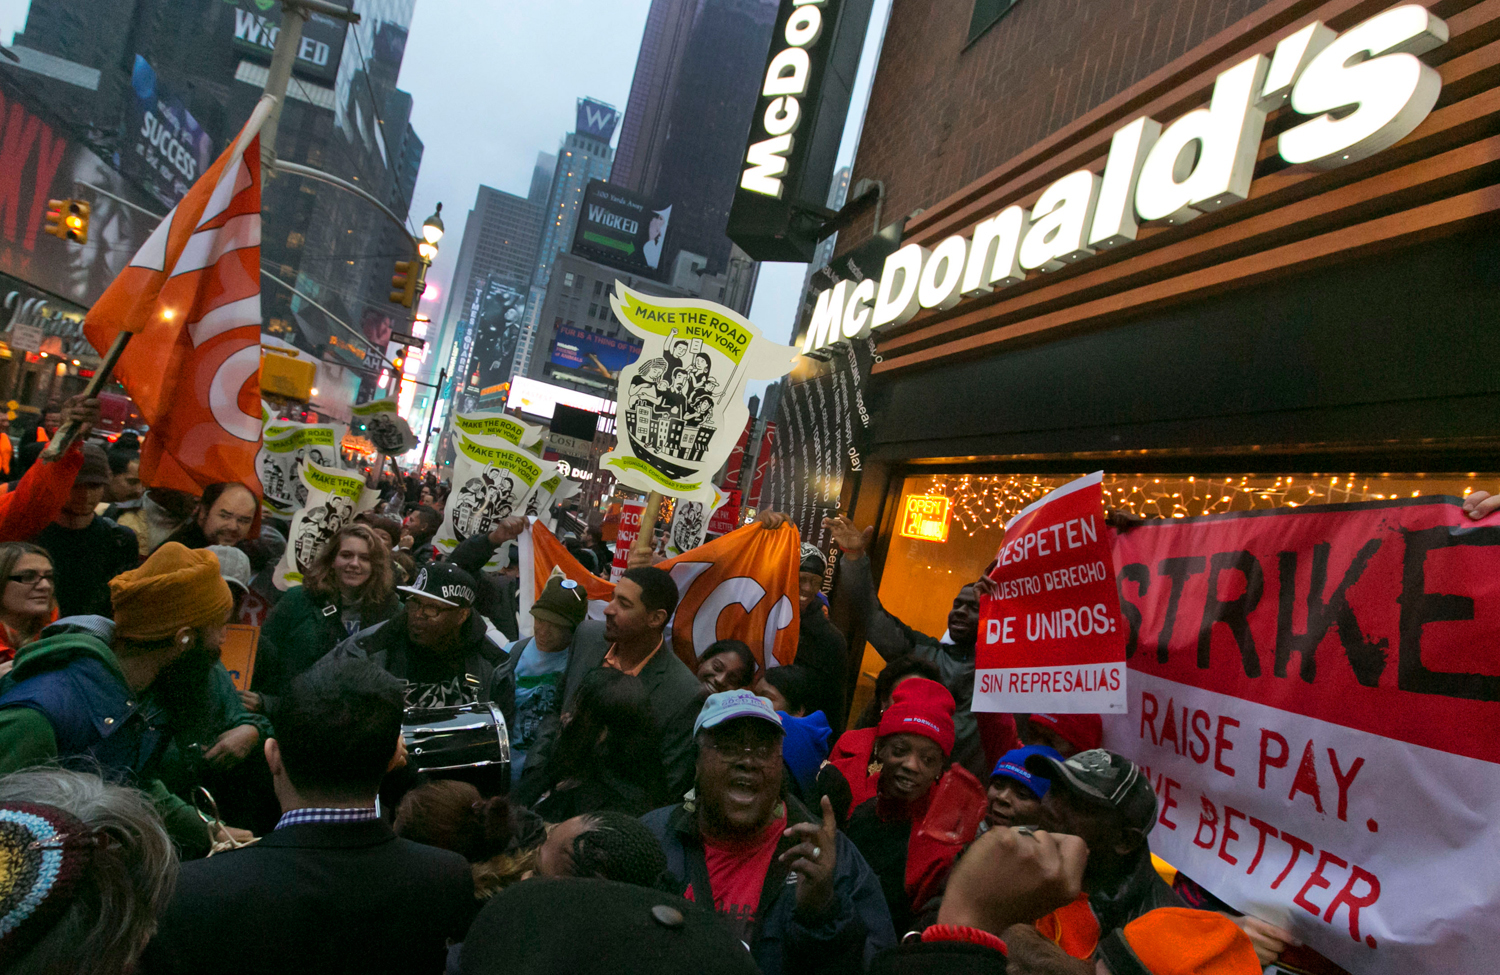 Americans Want a Great Big Increase in the Minimum Wage